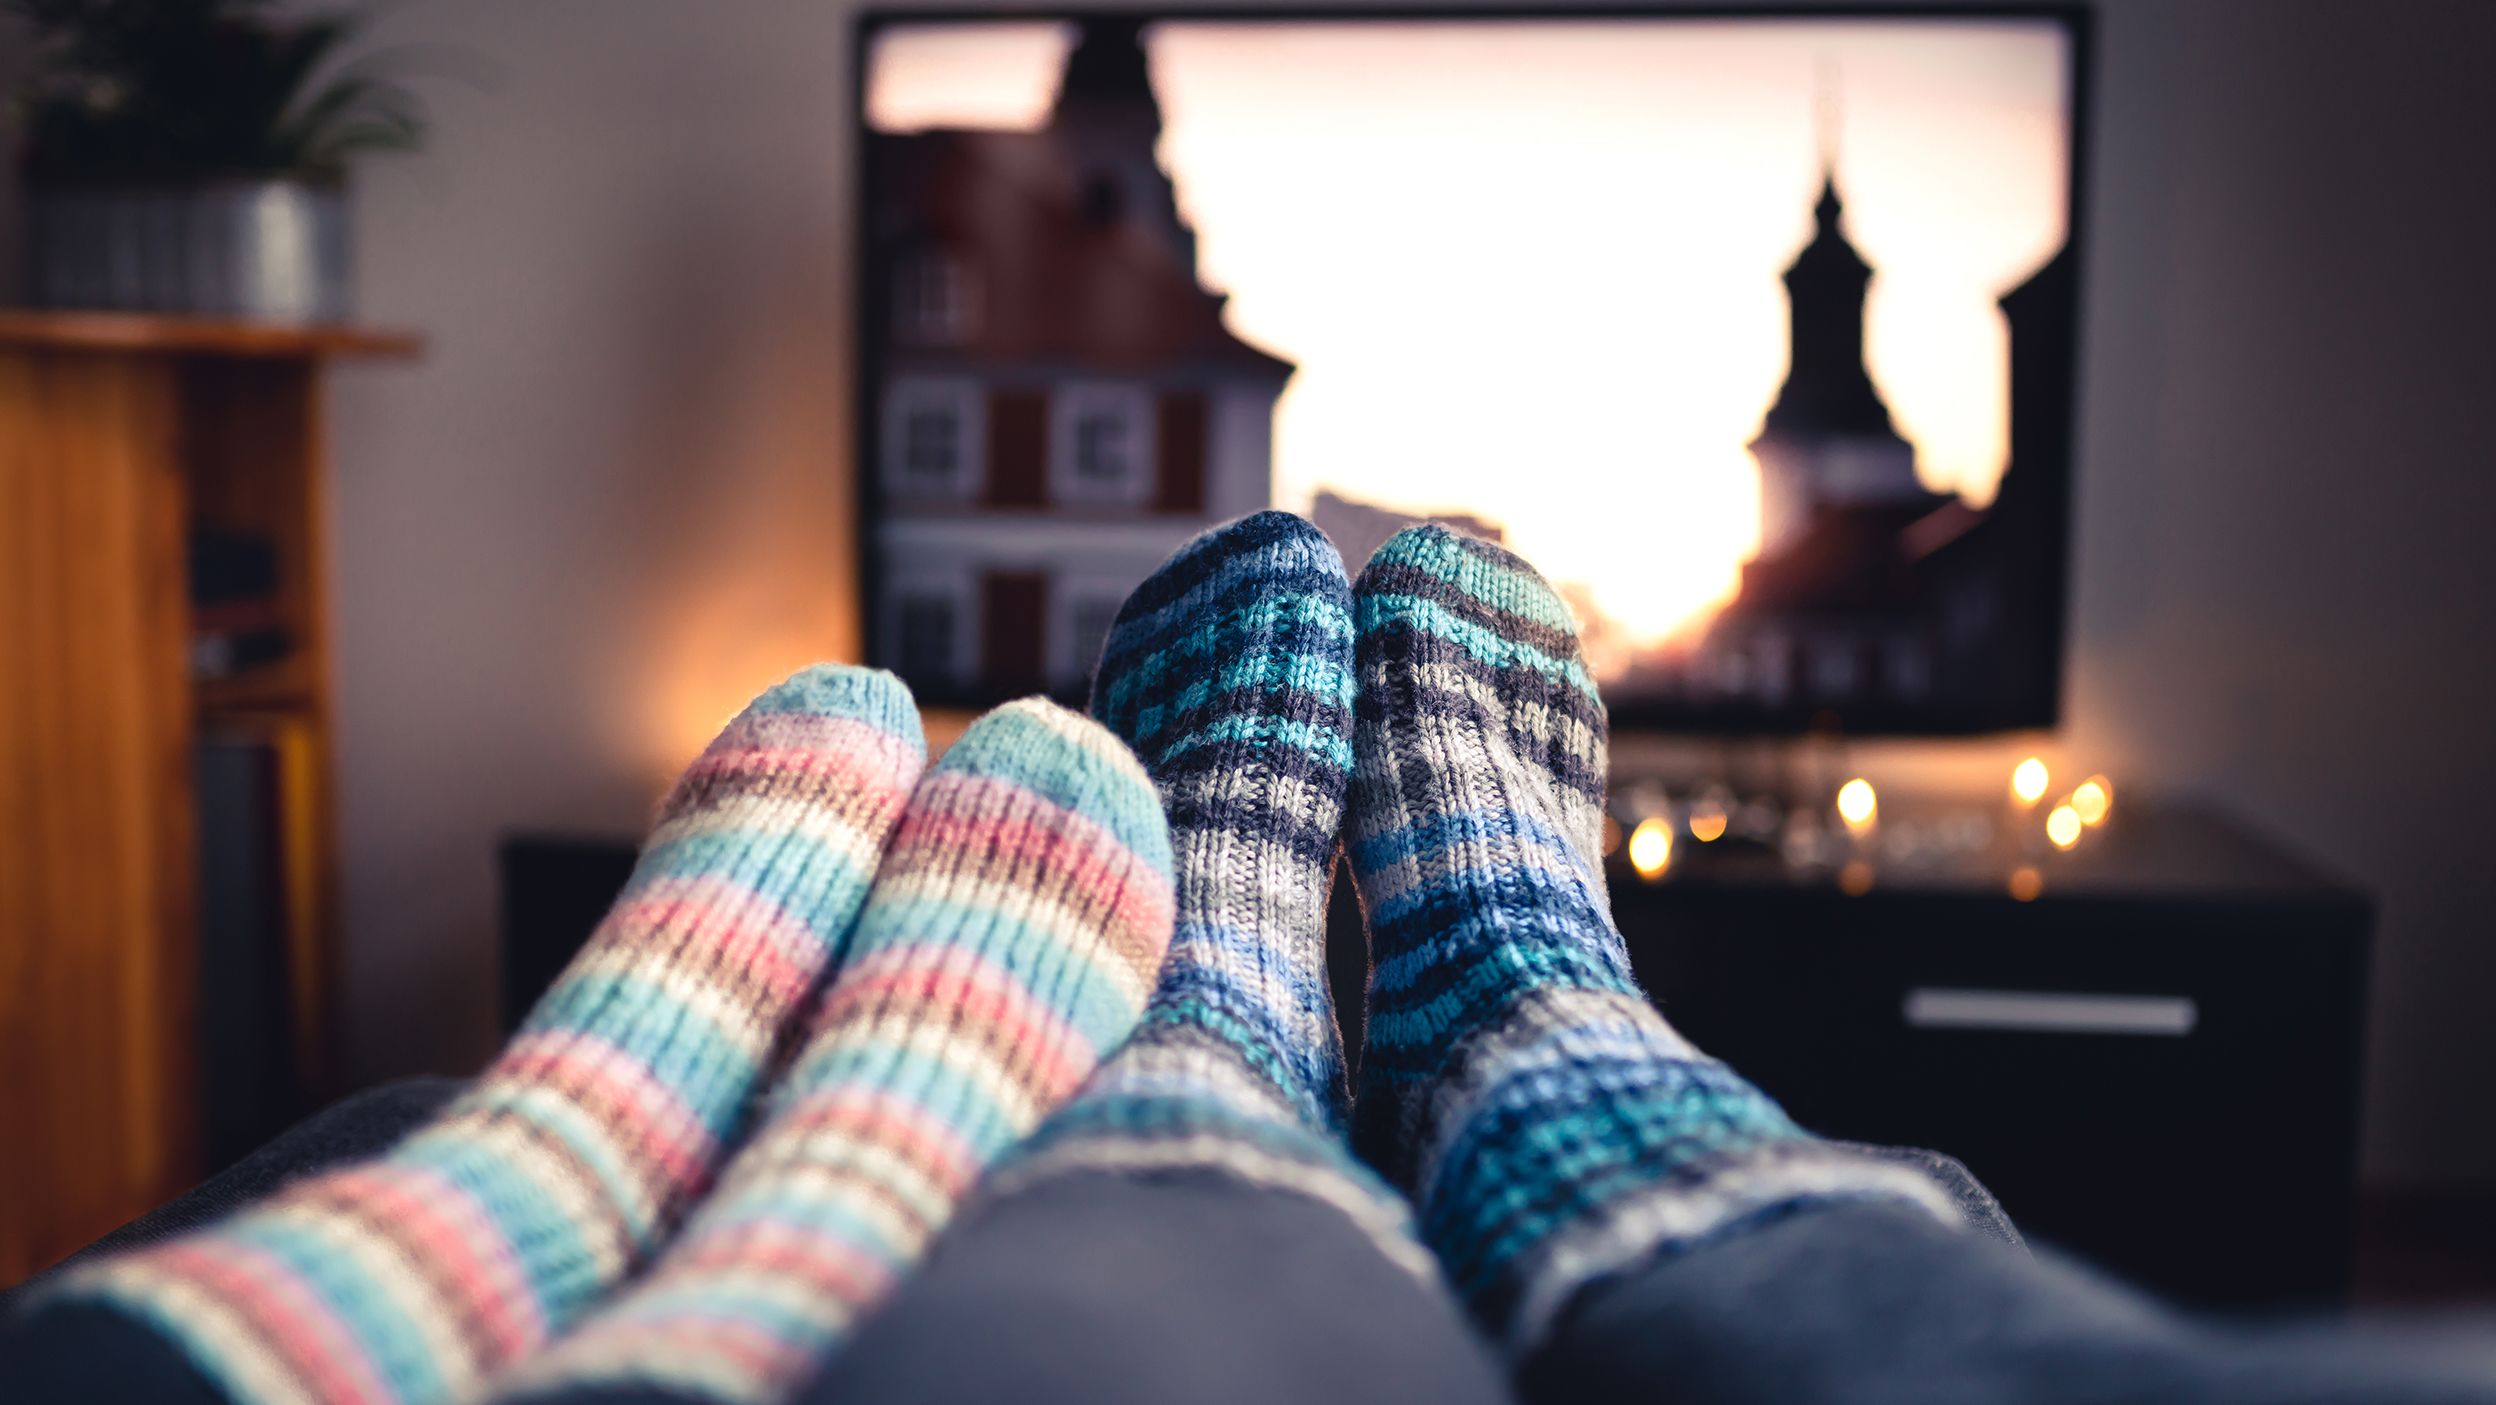 5 Comfortable Ankle-Length Socks To Keep Your Feet Cosy All Day Long